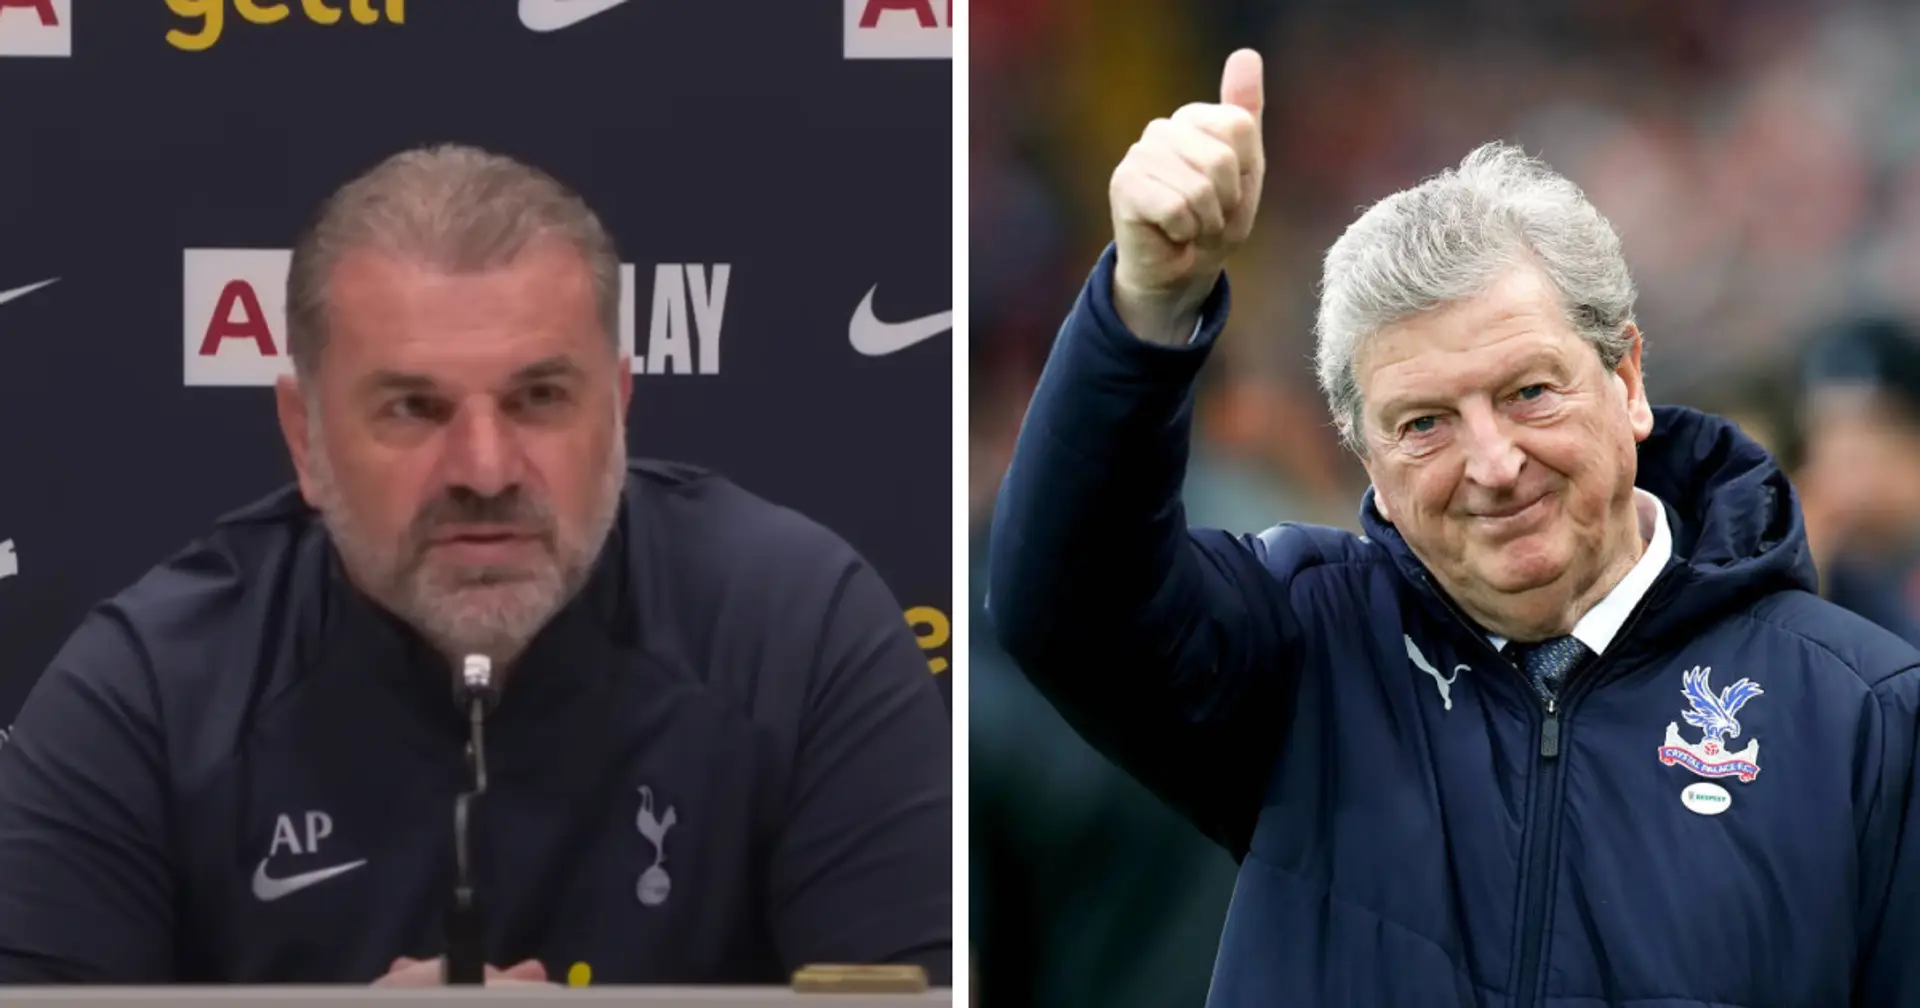 'He’s done it all in the game': Ange Postecoglou praises Roy Hodgson before their match 